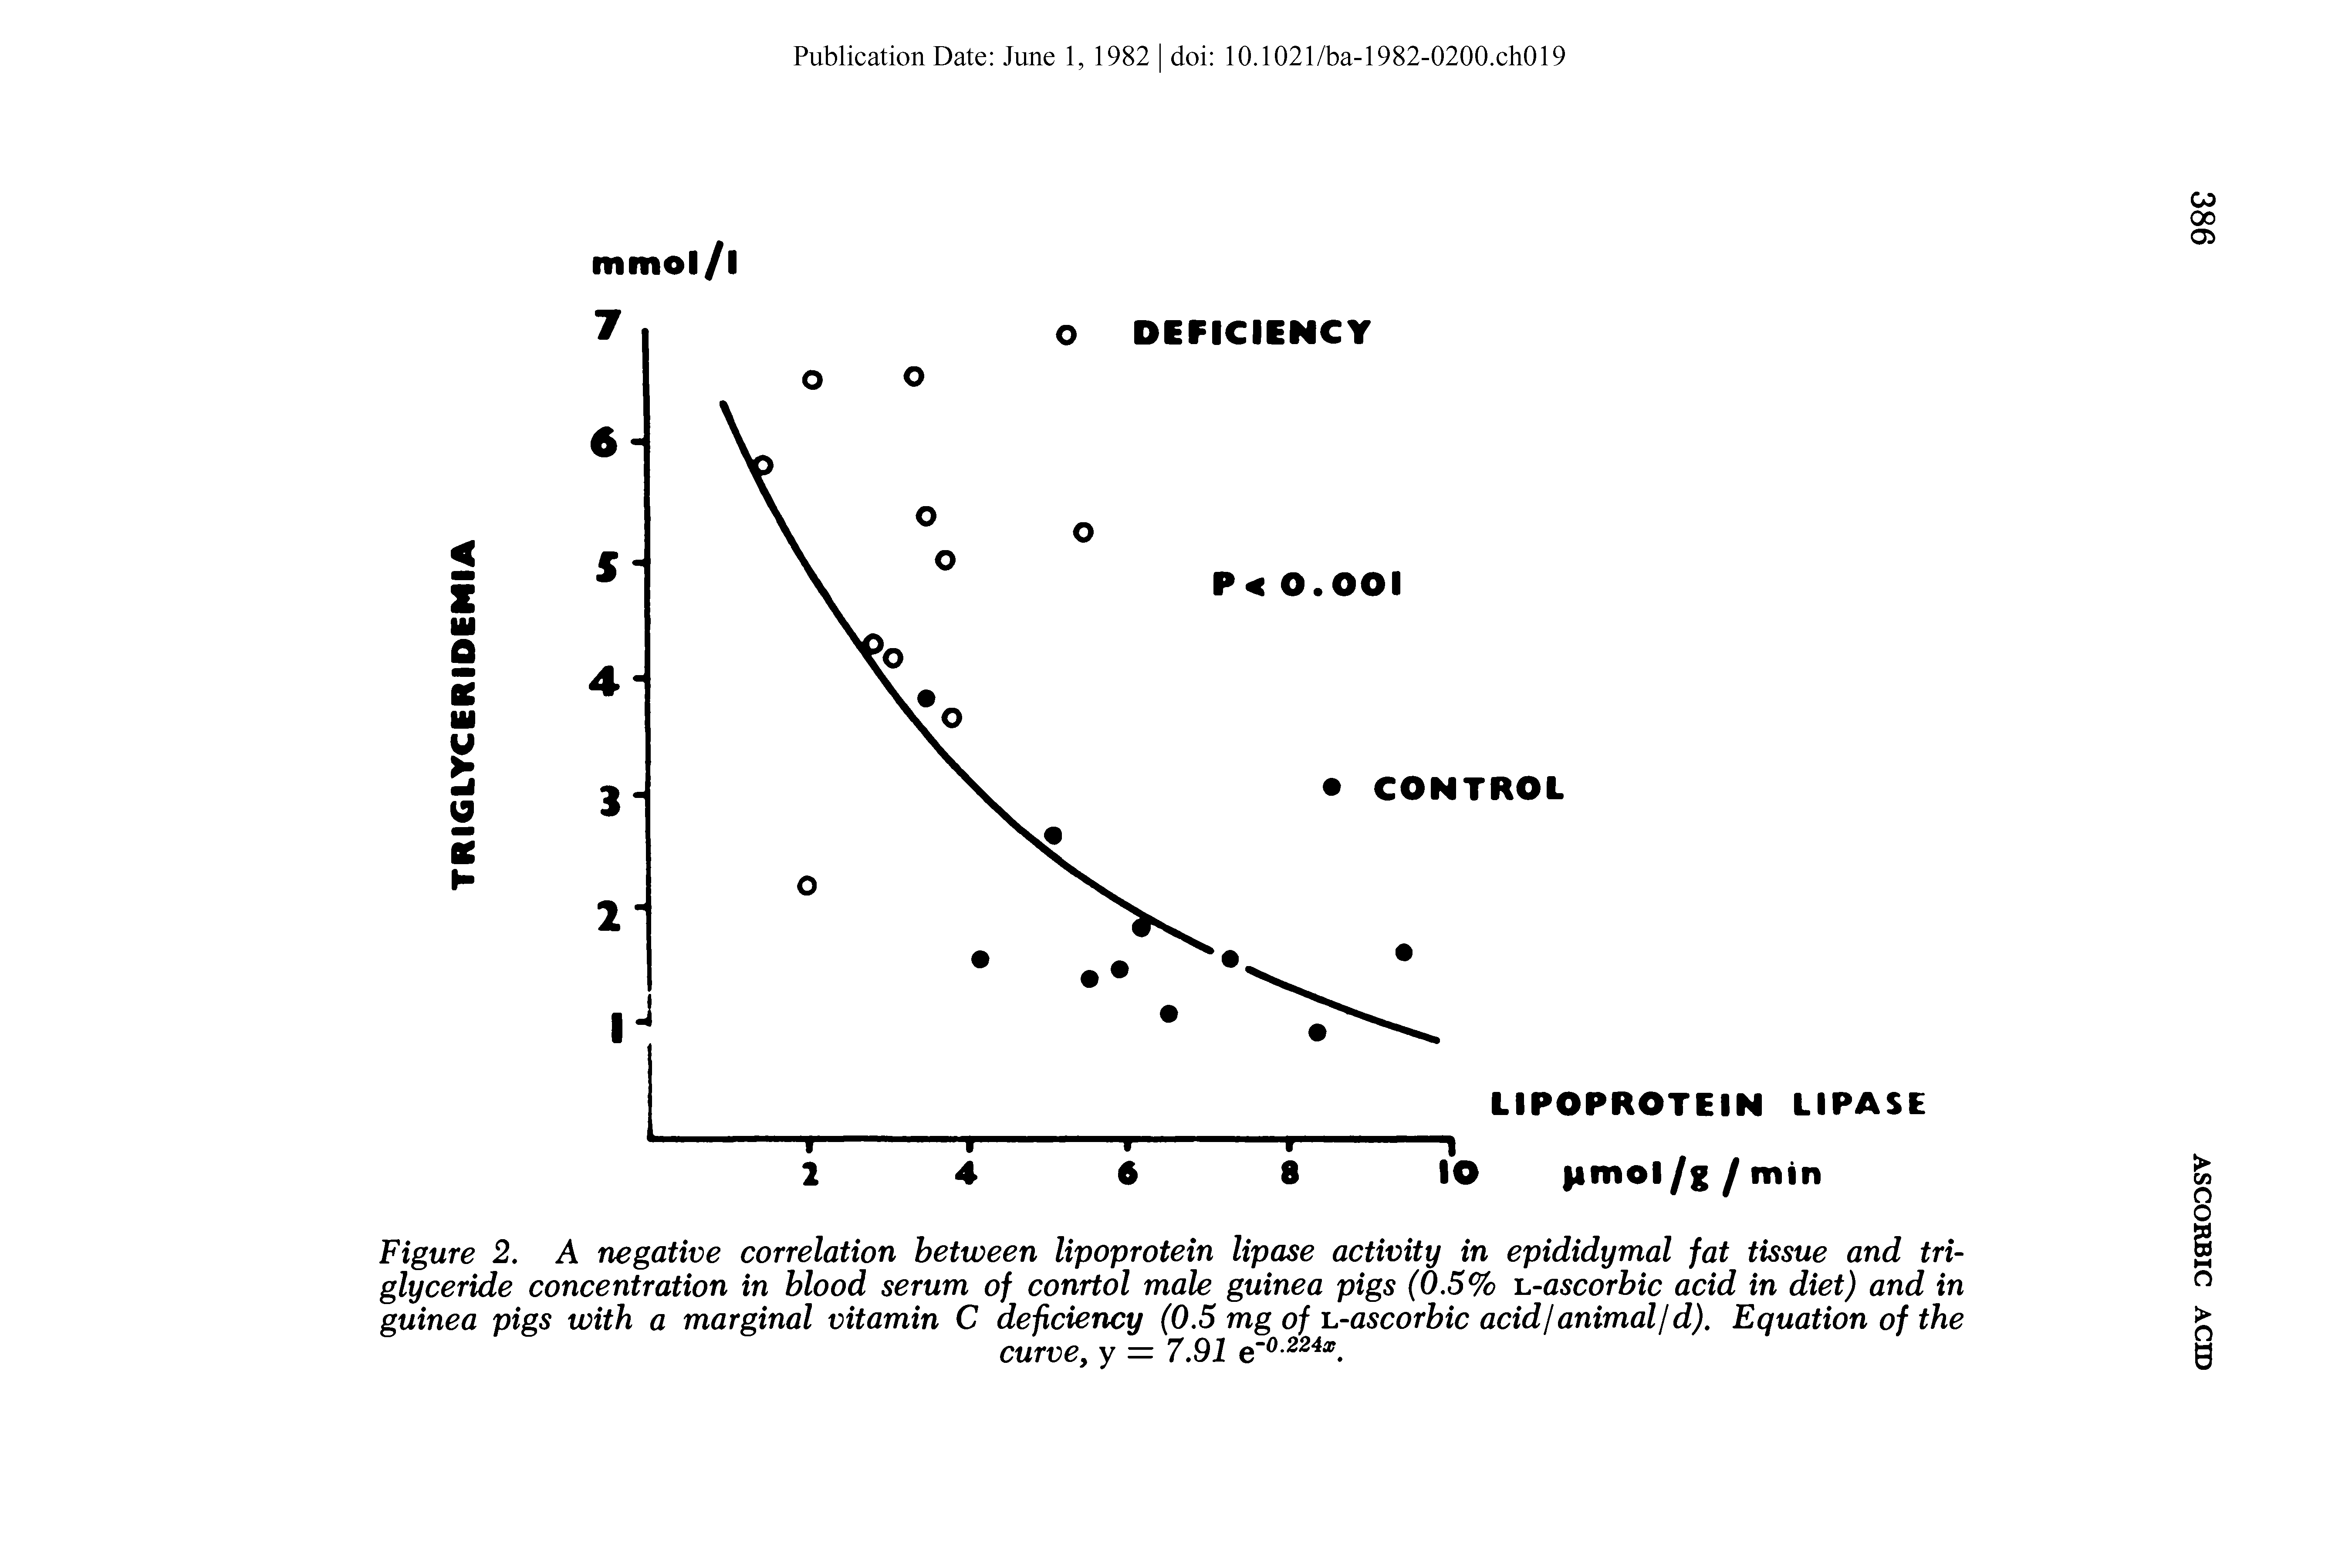 Figure 2. A negative correlation between lipoprotein lipase activity in epididymal fat tissue and triglyceride concentration in blood serum of conrtol male guinea pigs (0.5% i.-ascorbic acid in diet) and in guinea pigs with a marginal vitamin C deficiency (0.5 mg of i.-ascorbic acidjanimaljd). Equation of the...